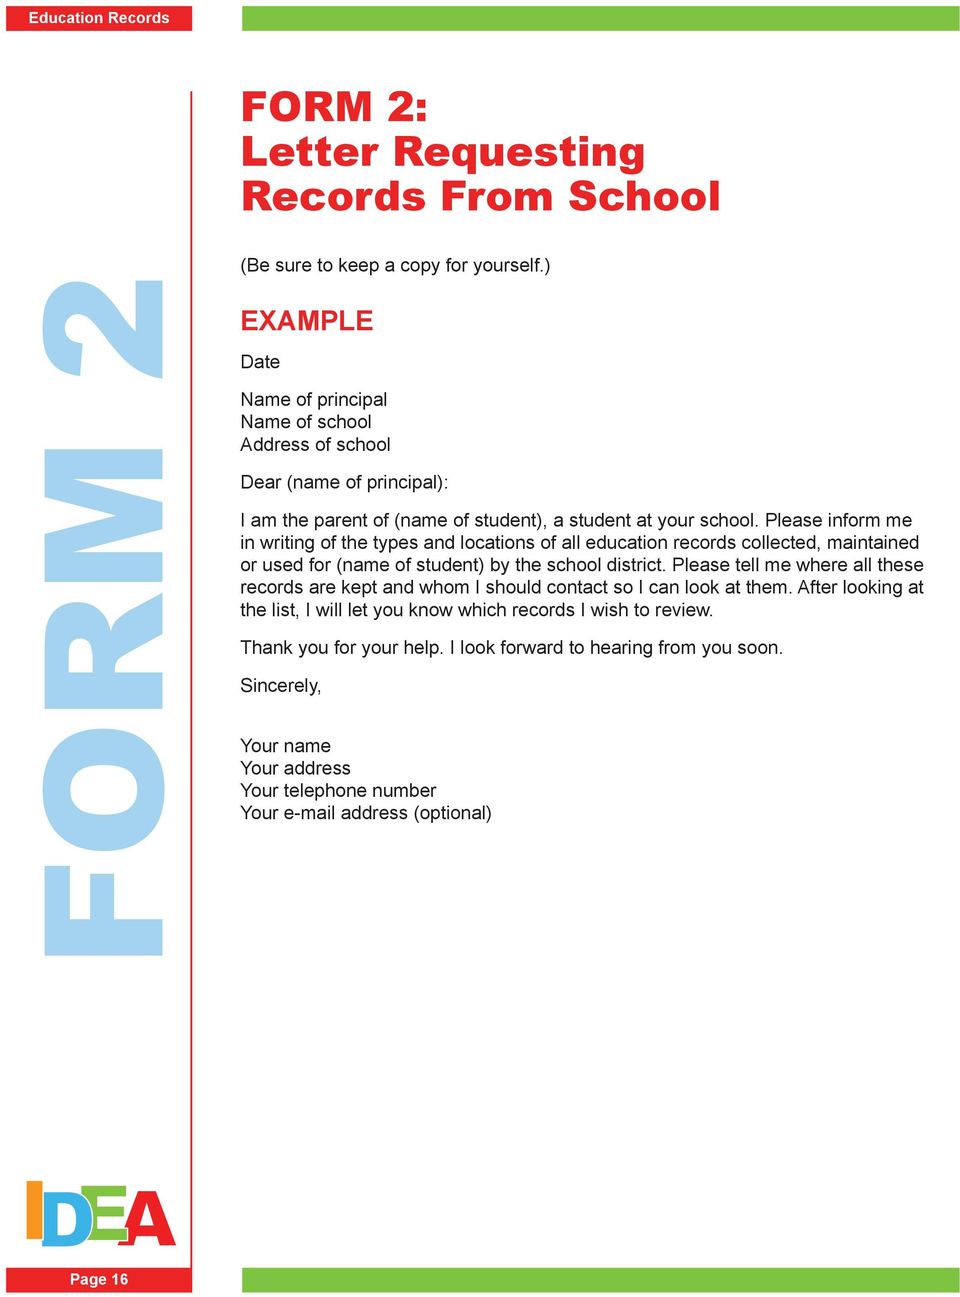 Please inform me in writing of the types and locations of all education records collected, maintained or used for (name of student) by the school district.